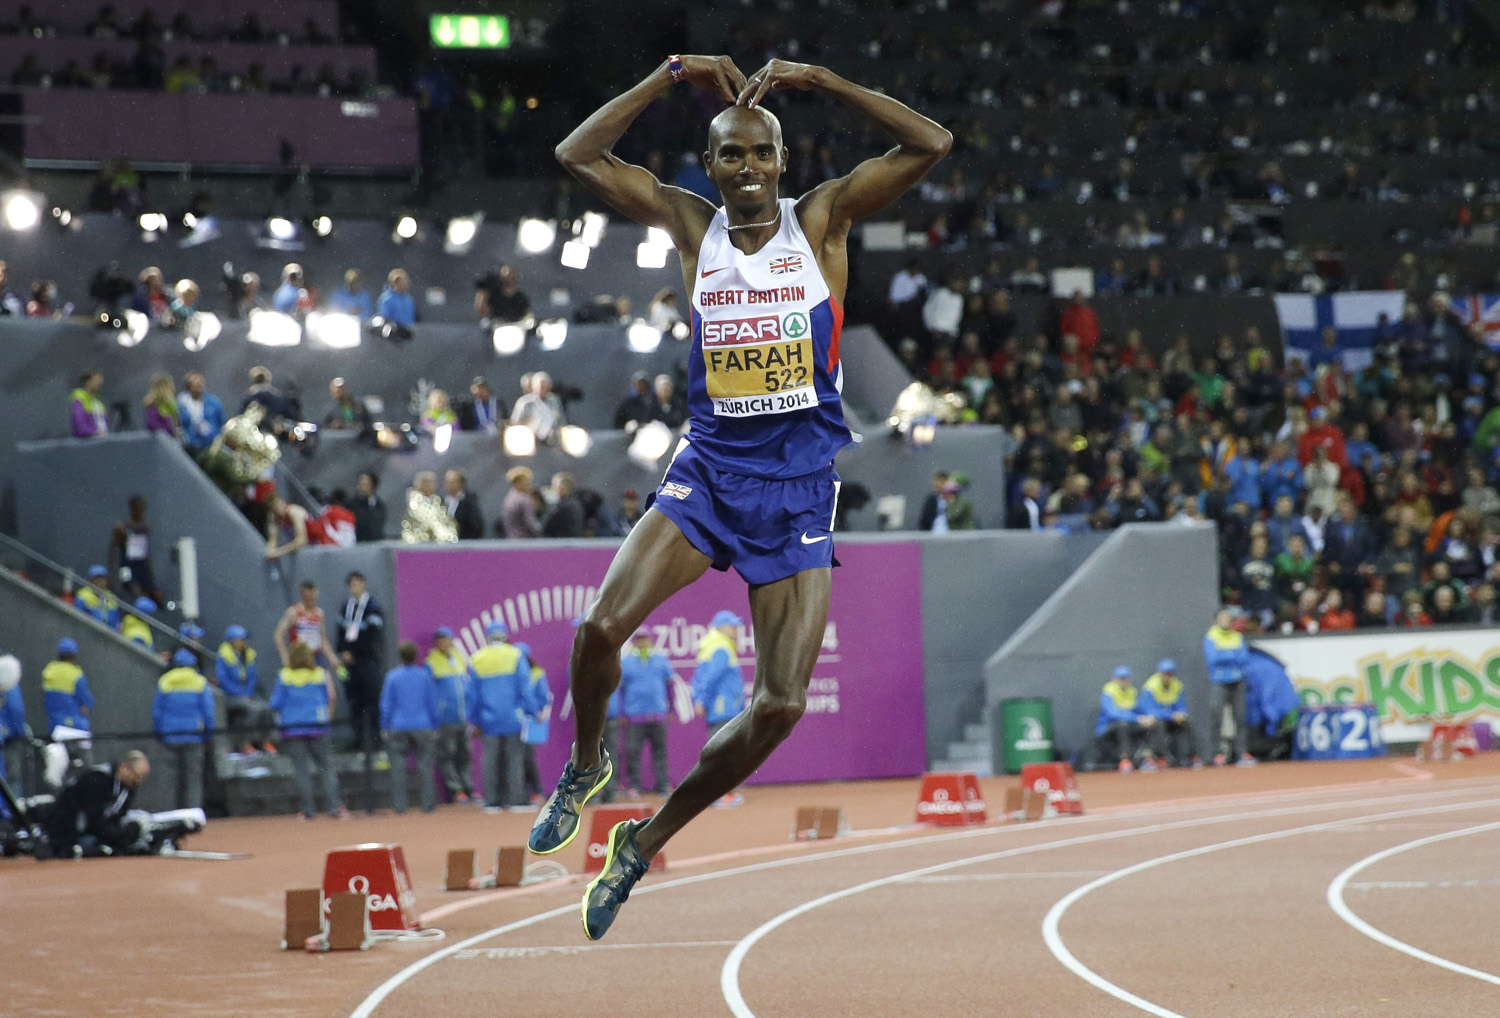 Britain's Mo Farah dances as he celebrates winning the gold medal in the men's 10,000m final during the European Athletics Championships in Zurich on August 13, 2014.